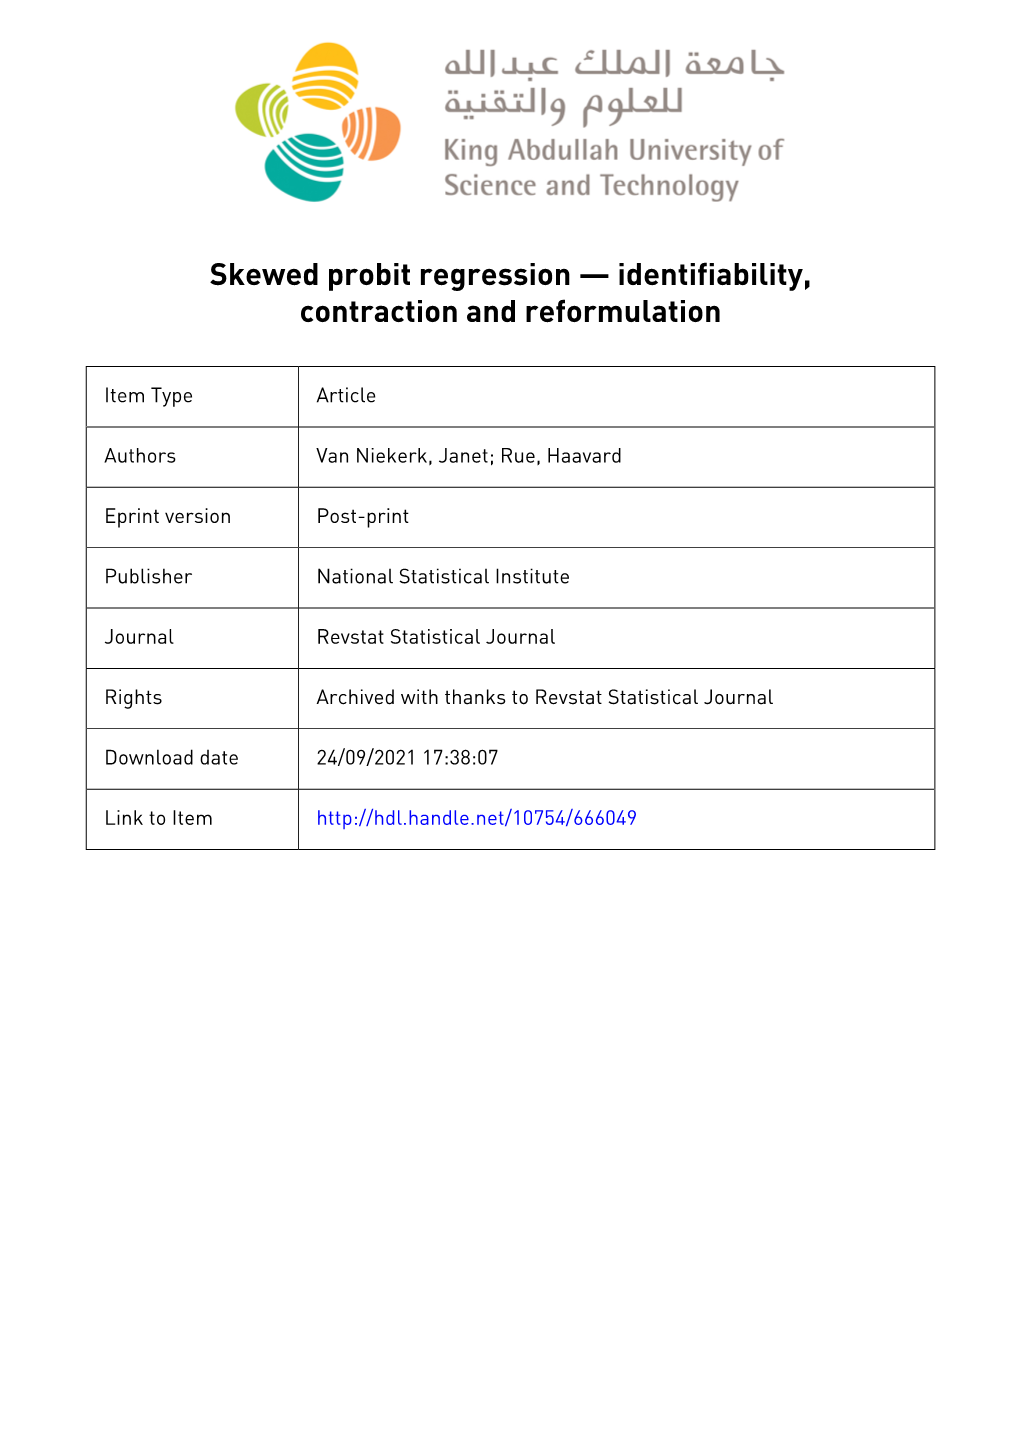 Skewed Probit Regression — Identifiability, Contraction and Reformulation